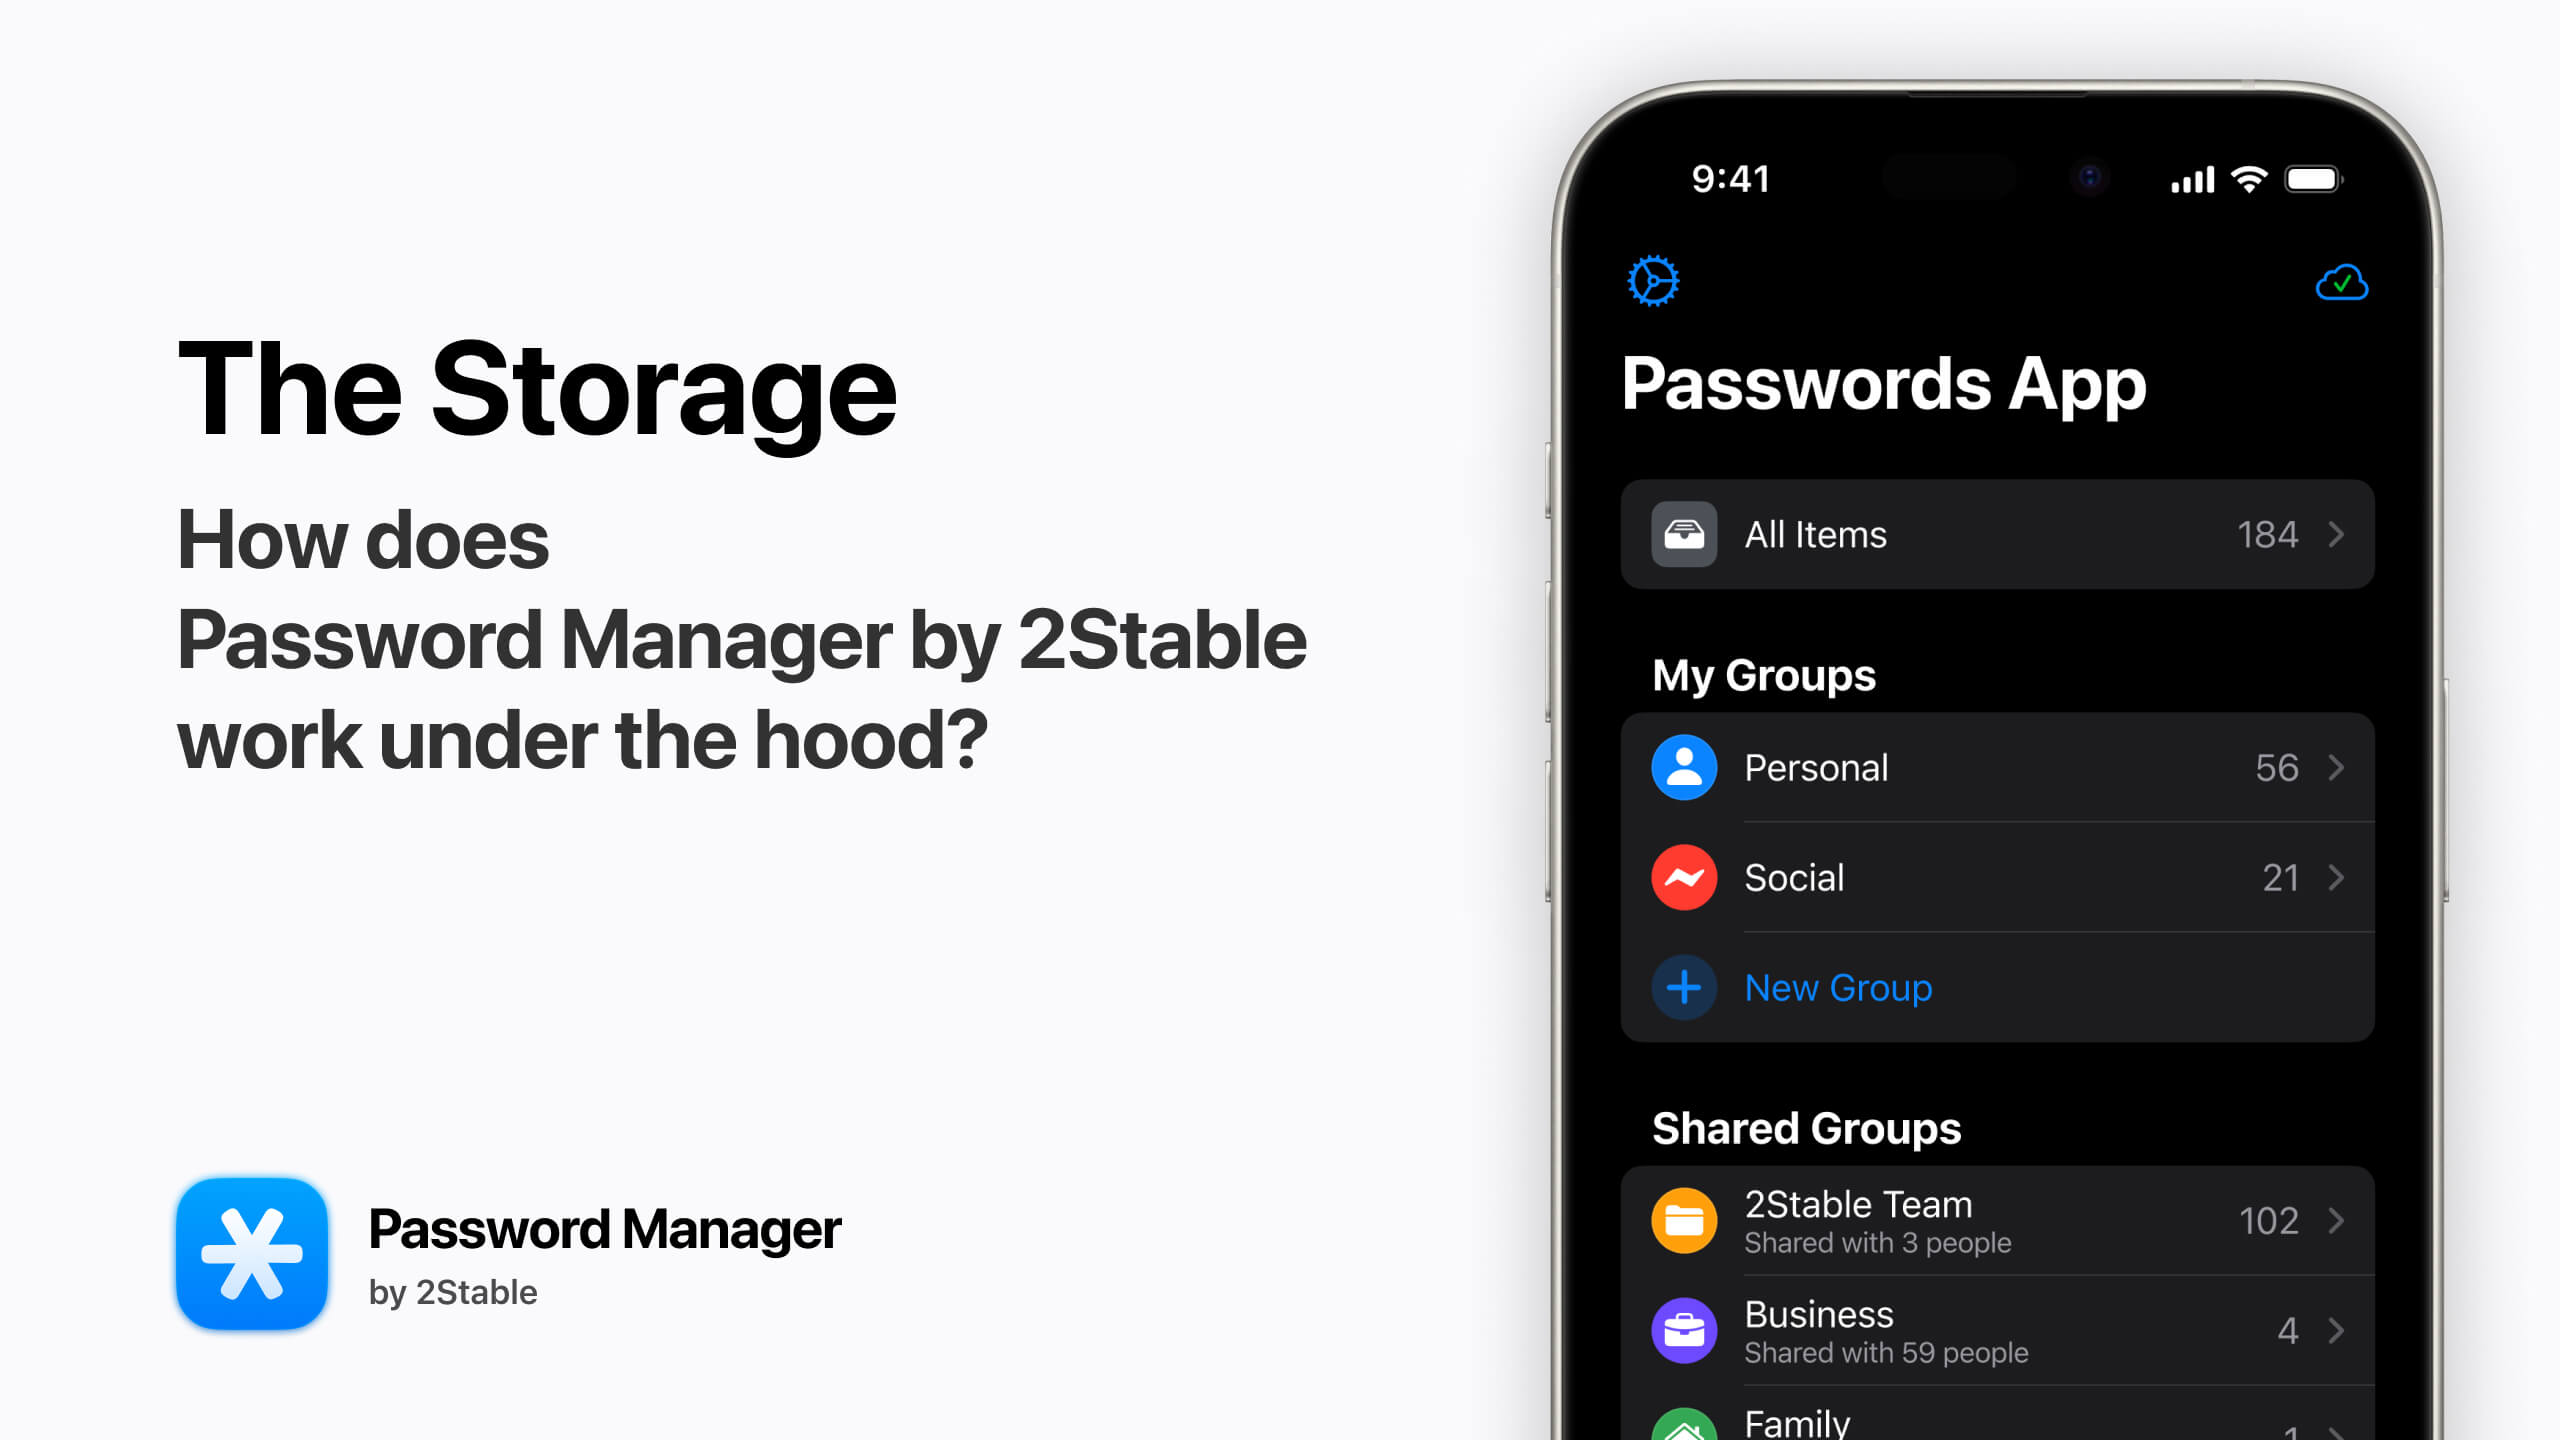 How does Password Manager by 2Stable work under the hood? Part 2, The Storage.